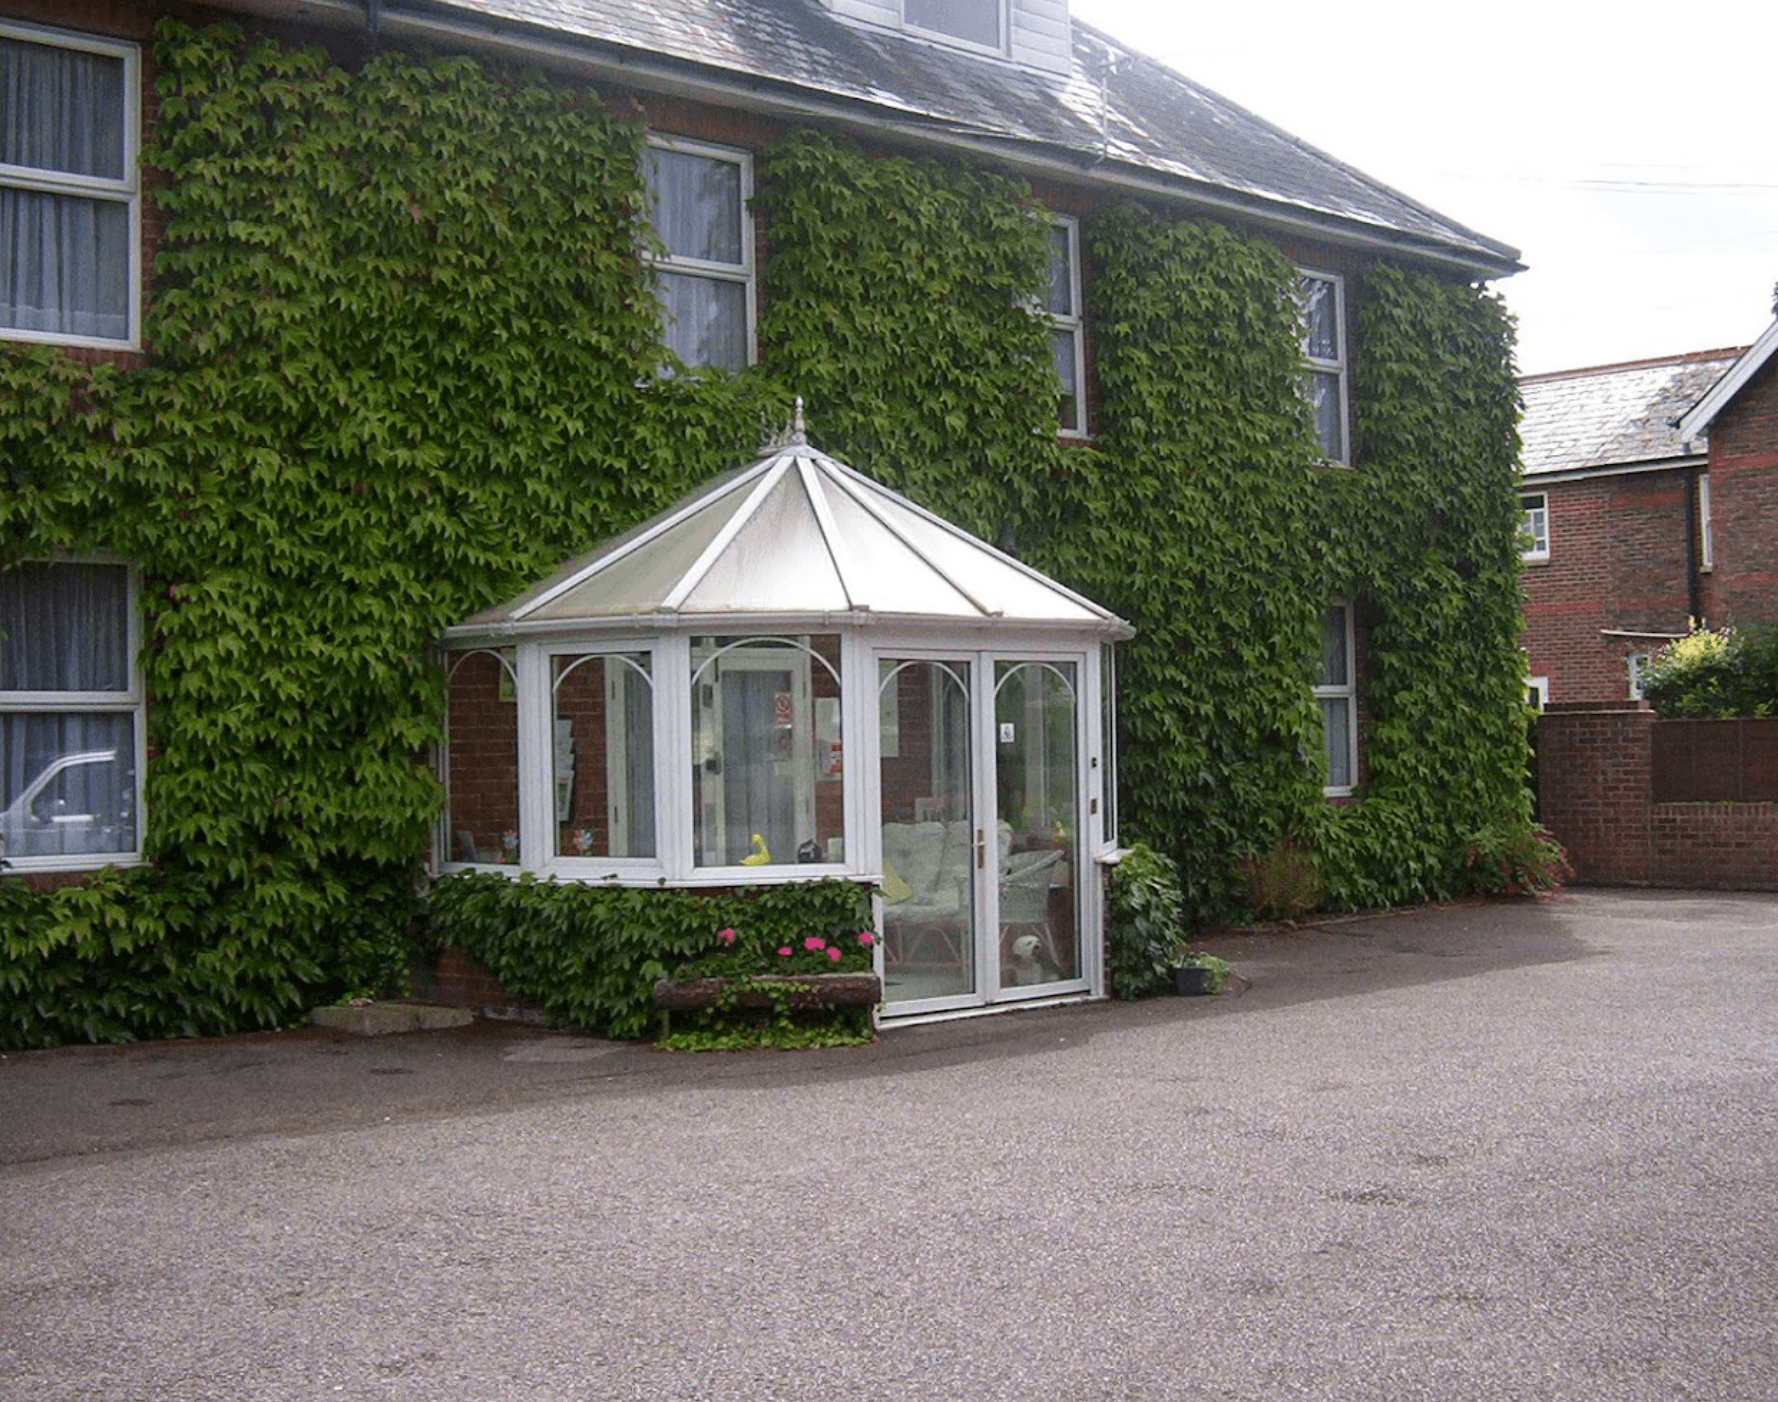 Ferndale Residential Care Home in Emsworth